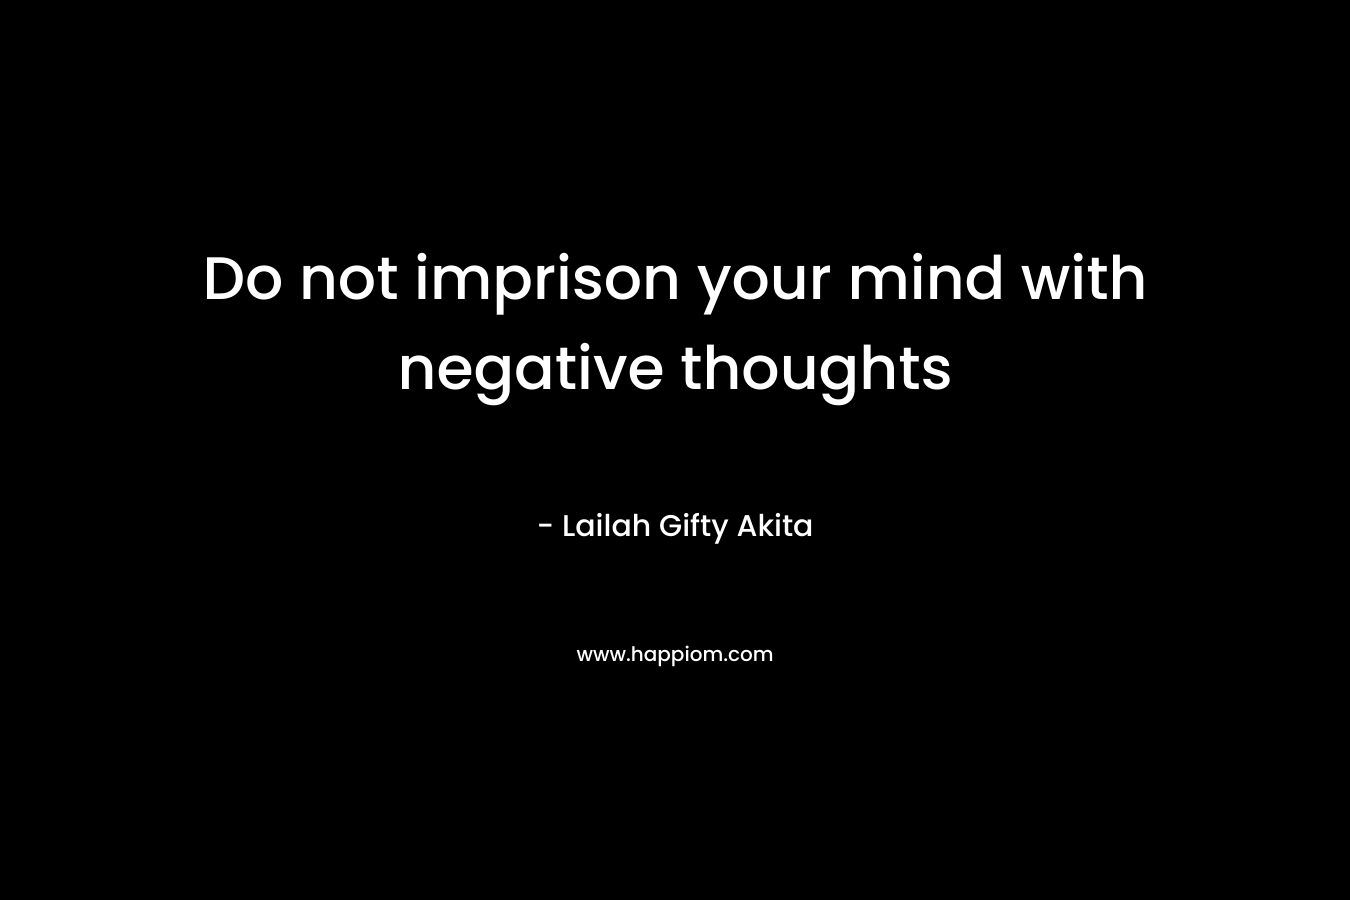 Do not imprison your mind with negative thoughts